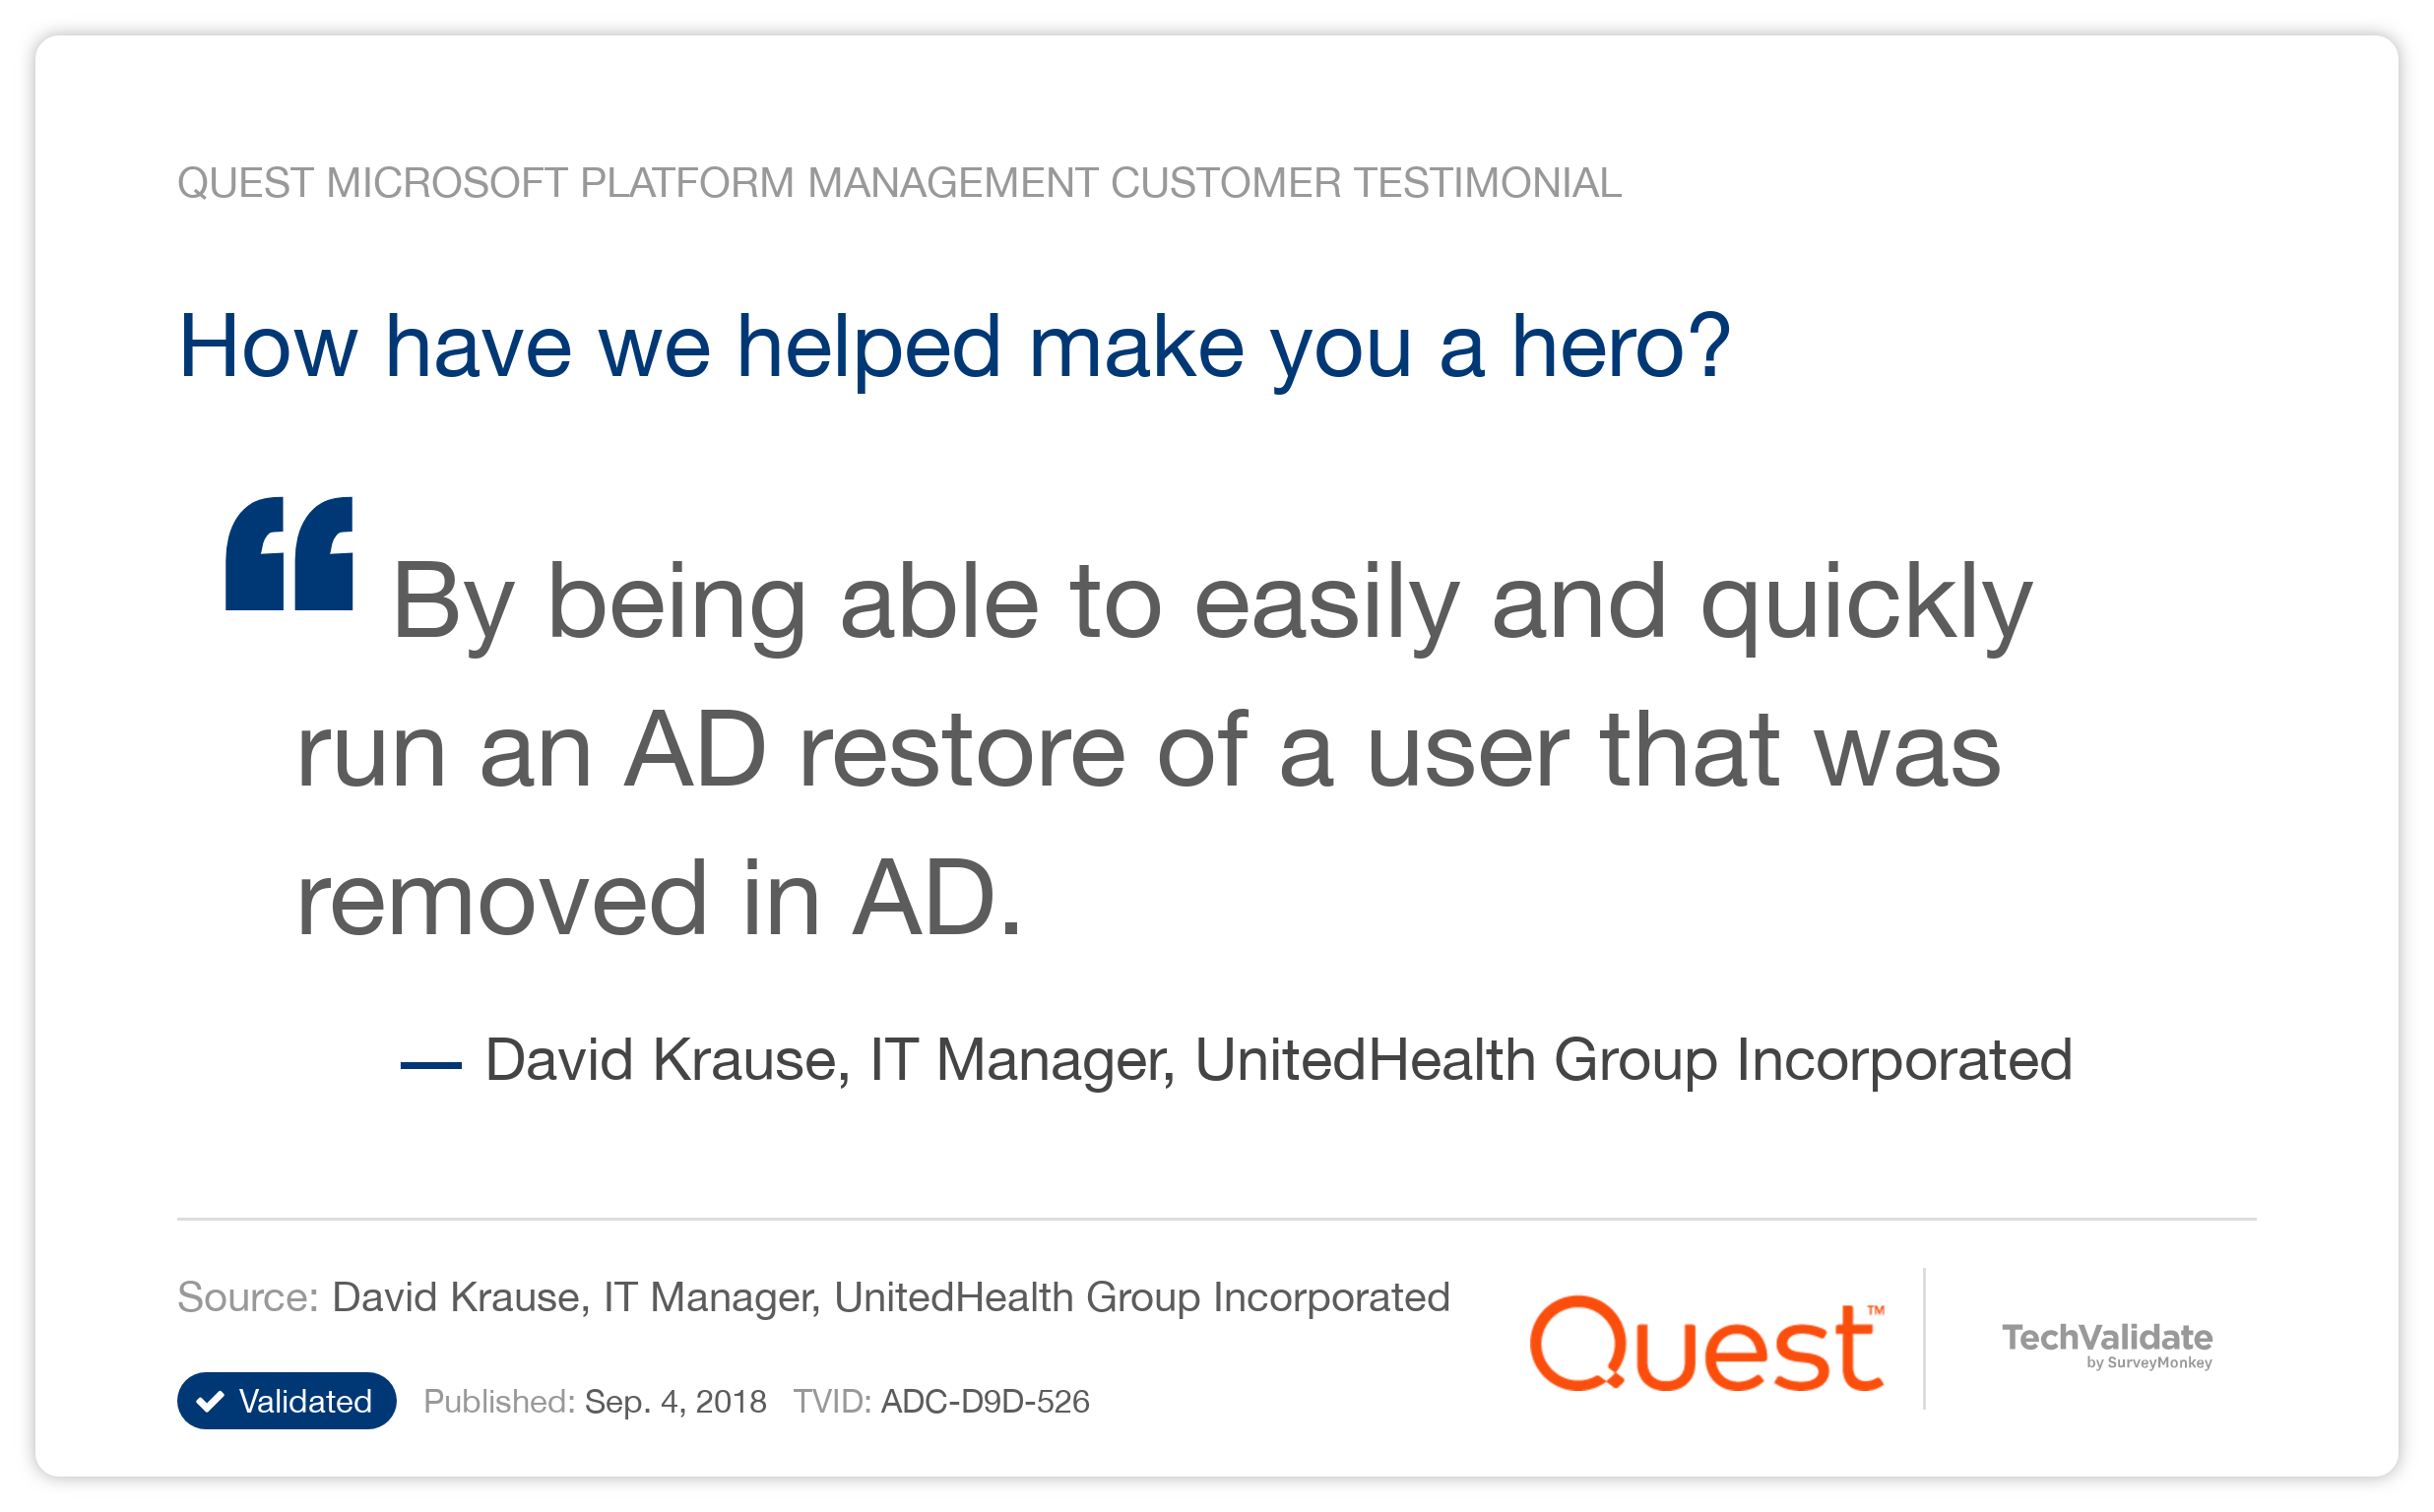 How have we helped make you a hero?